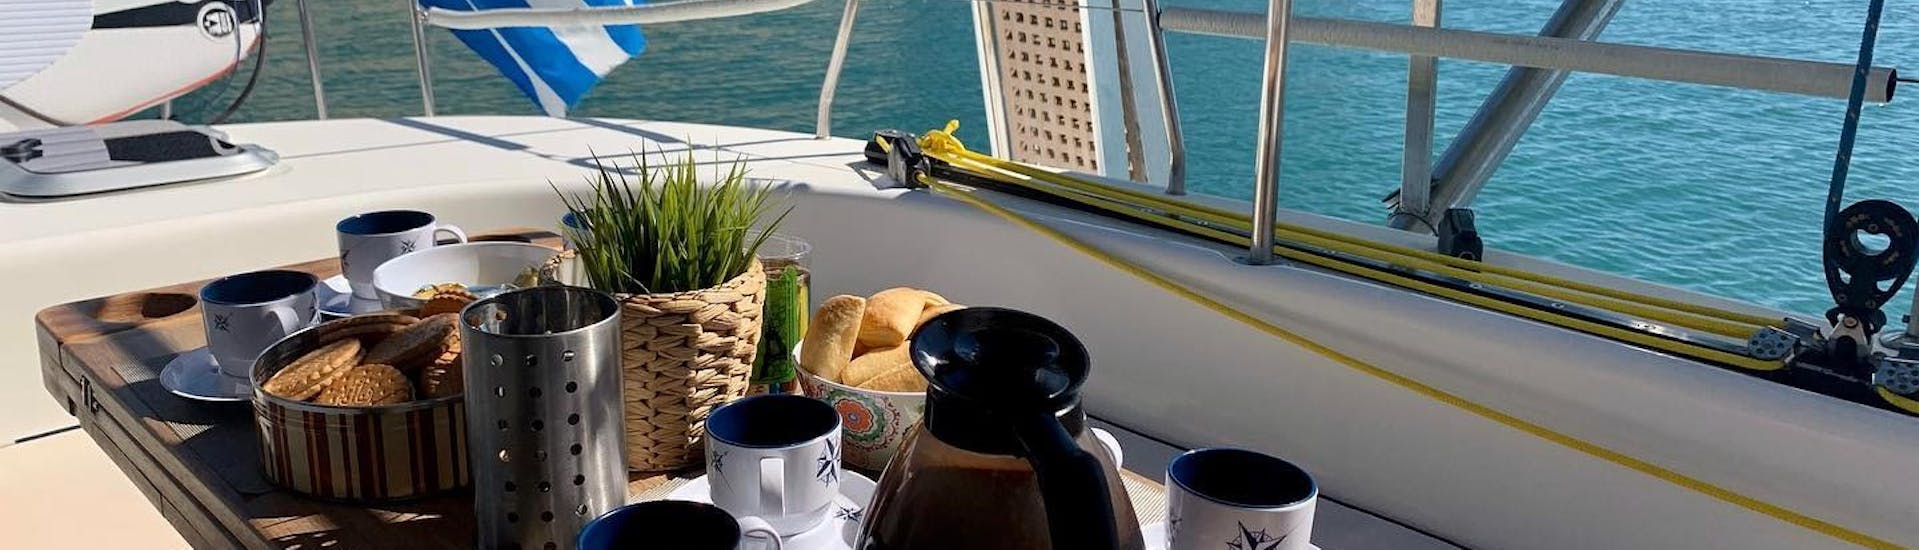 The food is served during the Catamaran Trip from Agios Nikolaos to the Mirabello Bay with DanEri Yachts Crete.